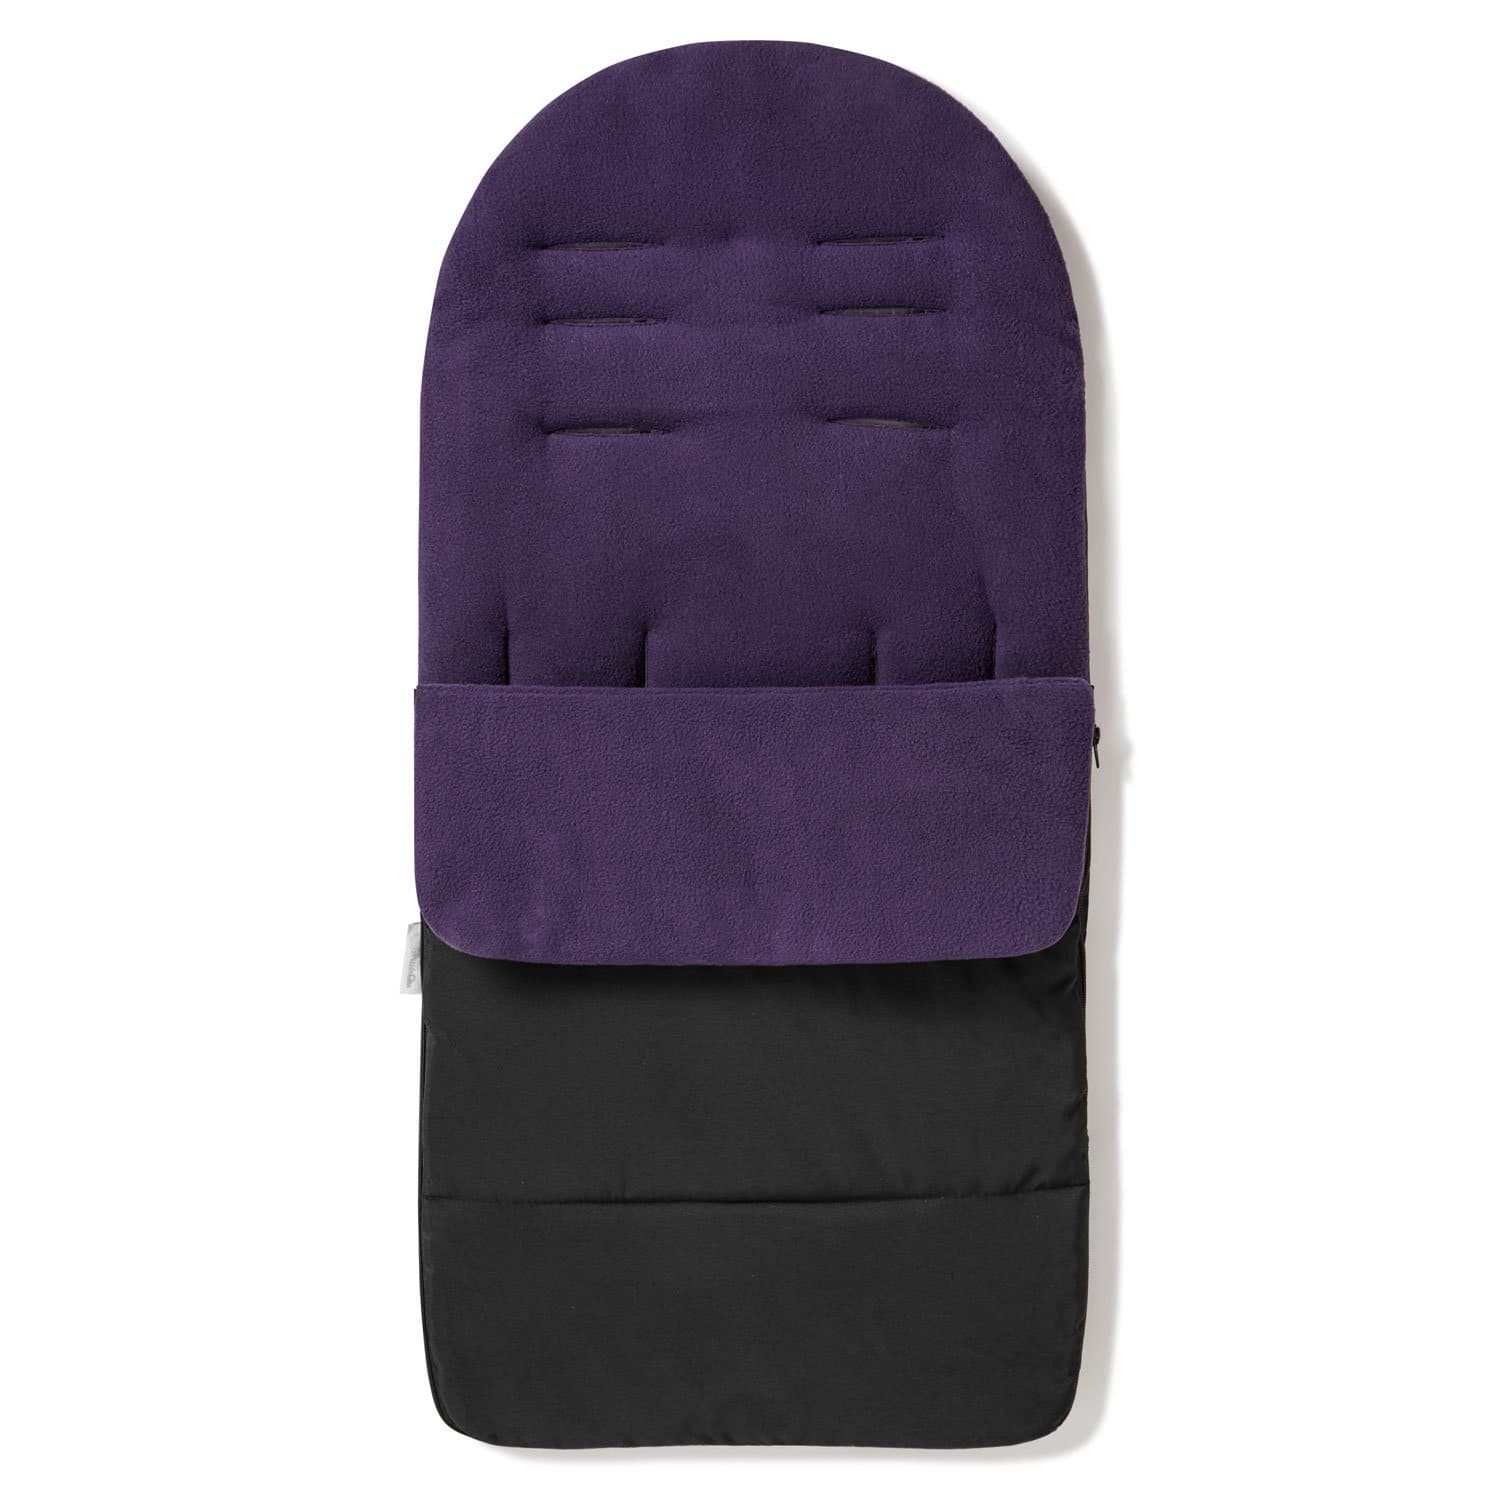 Premium Footmuff / Cosy Toes Compatible with Hauck - Plum Purple / Fits All Models | For Your Little One